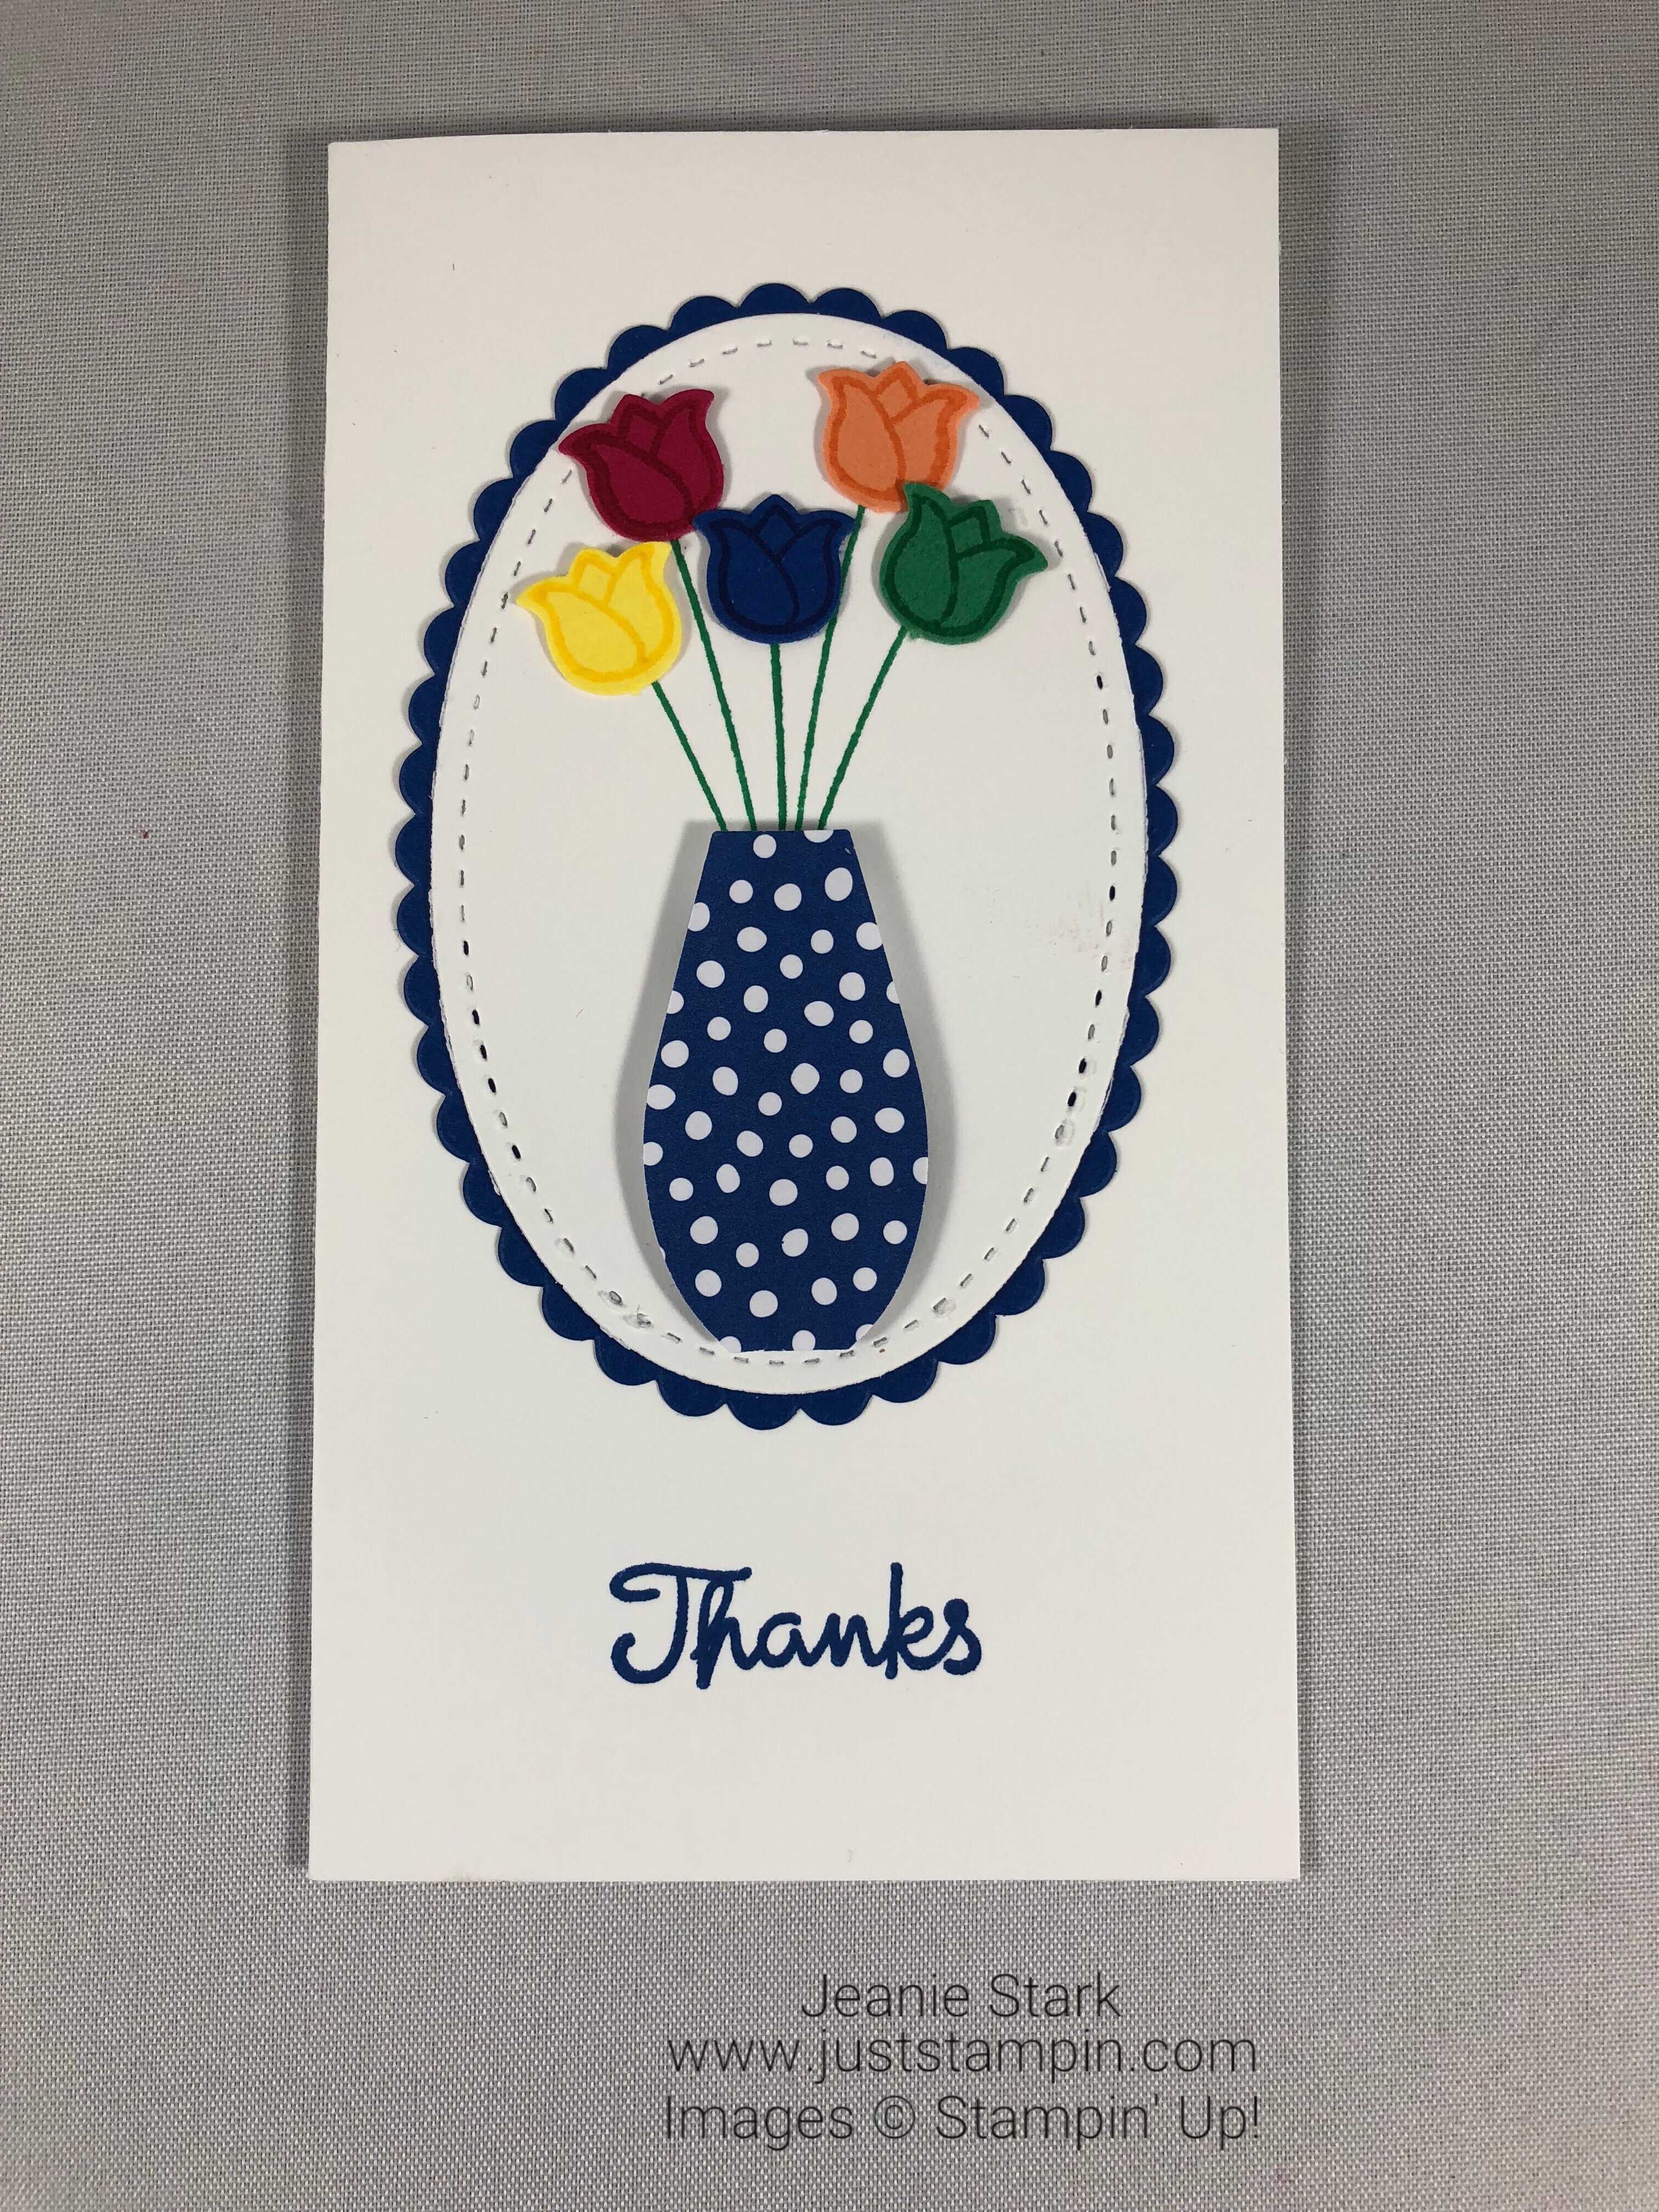 Stampin Up Varied Vases In Color thank you card idea - Jeanie Stark StampinUp